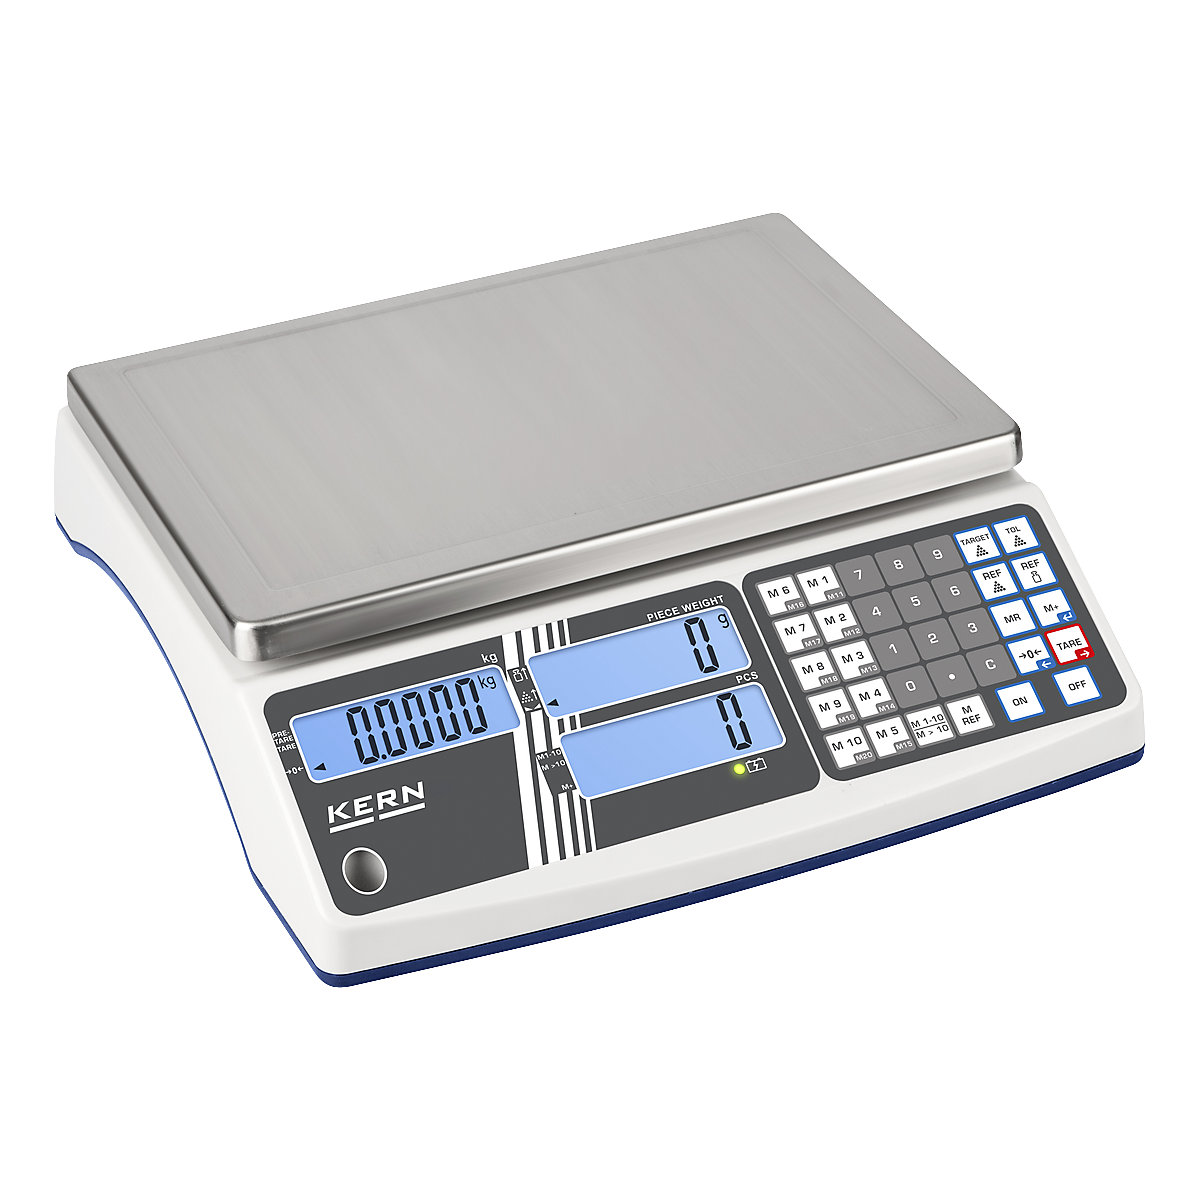 Counting scales – KERN, robust model, weighing range 30 kg, read-out accuracy 2 g-2